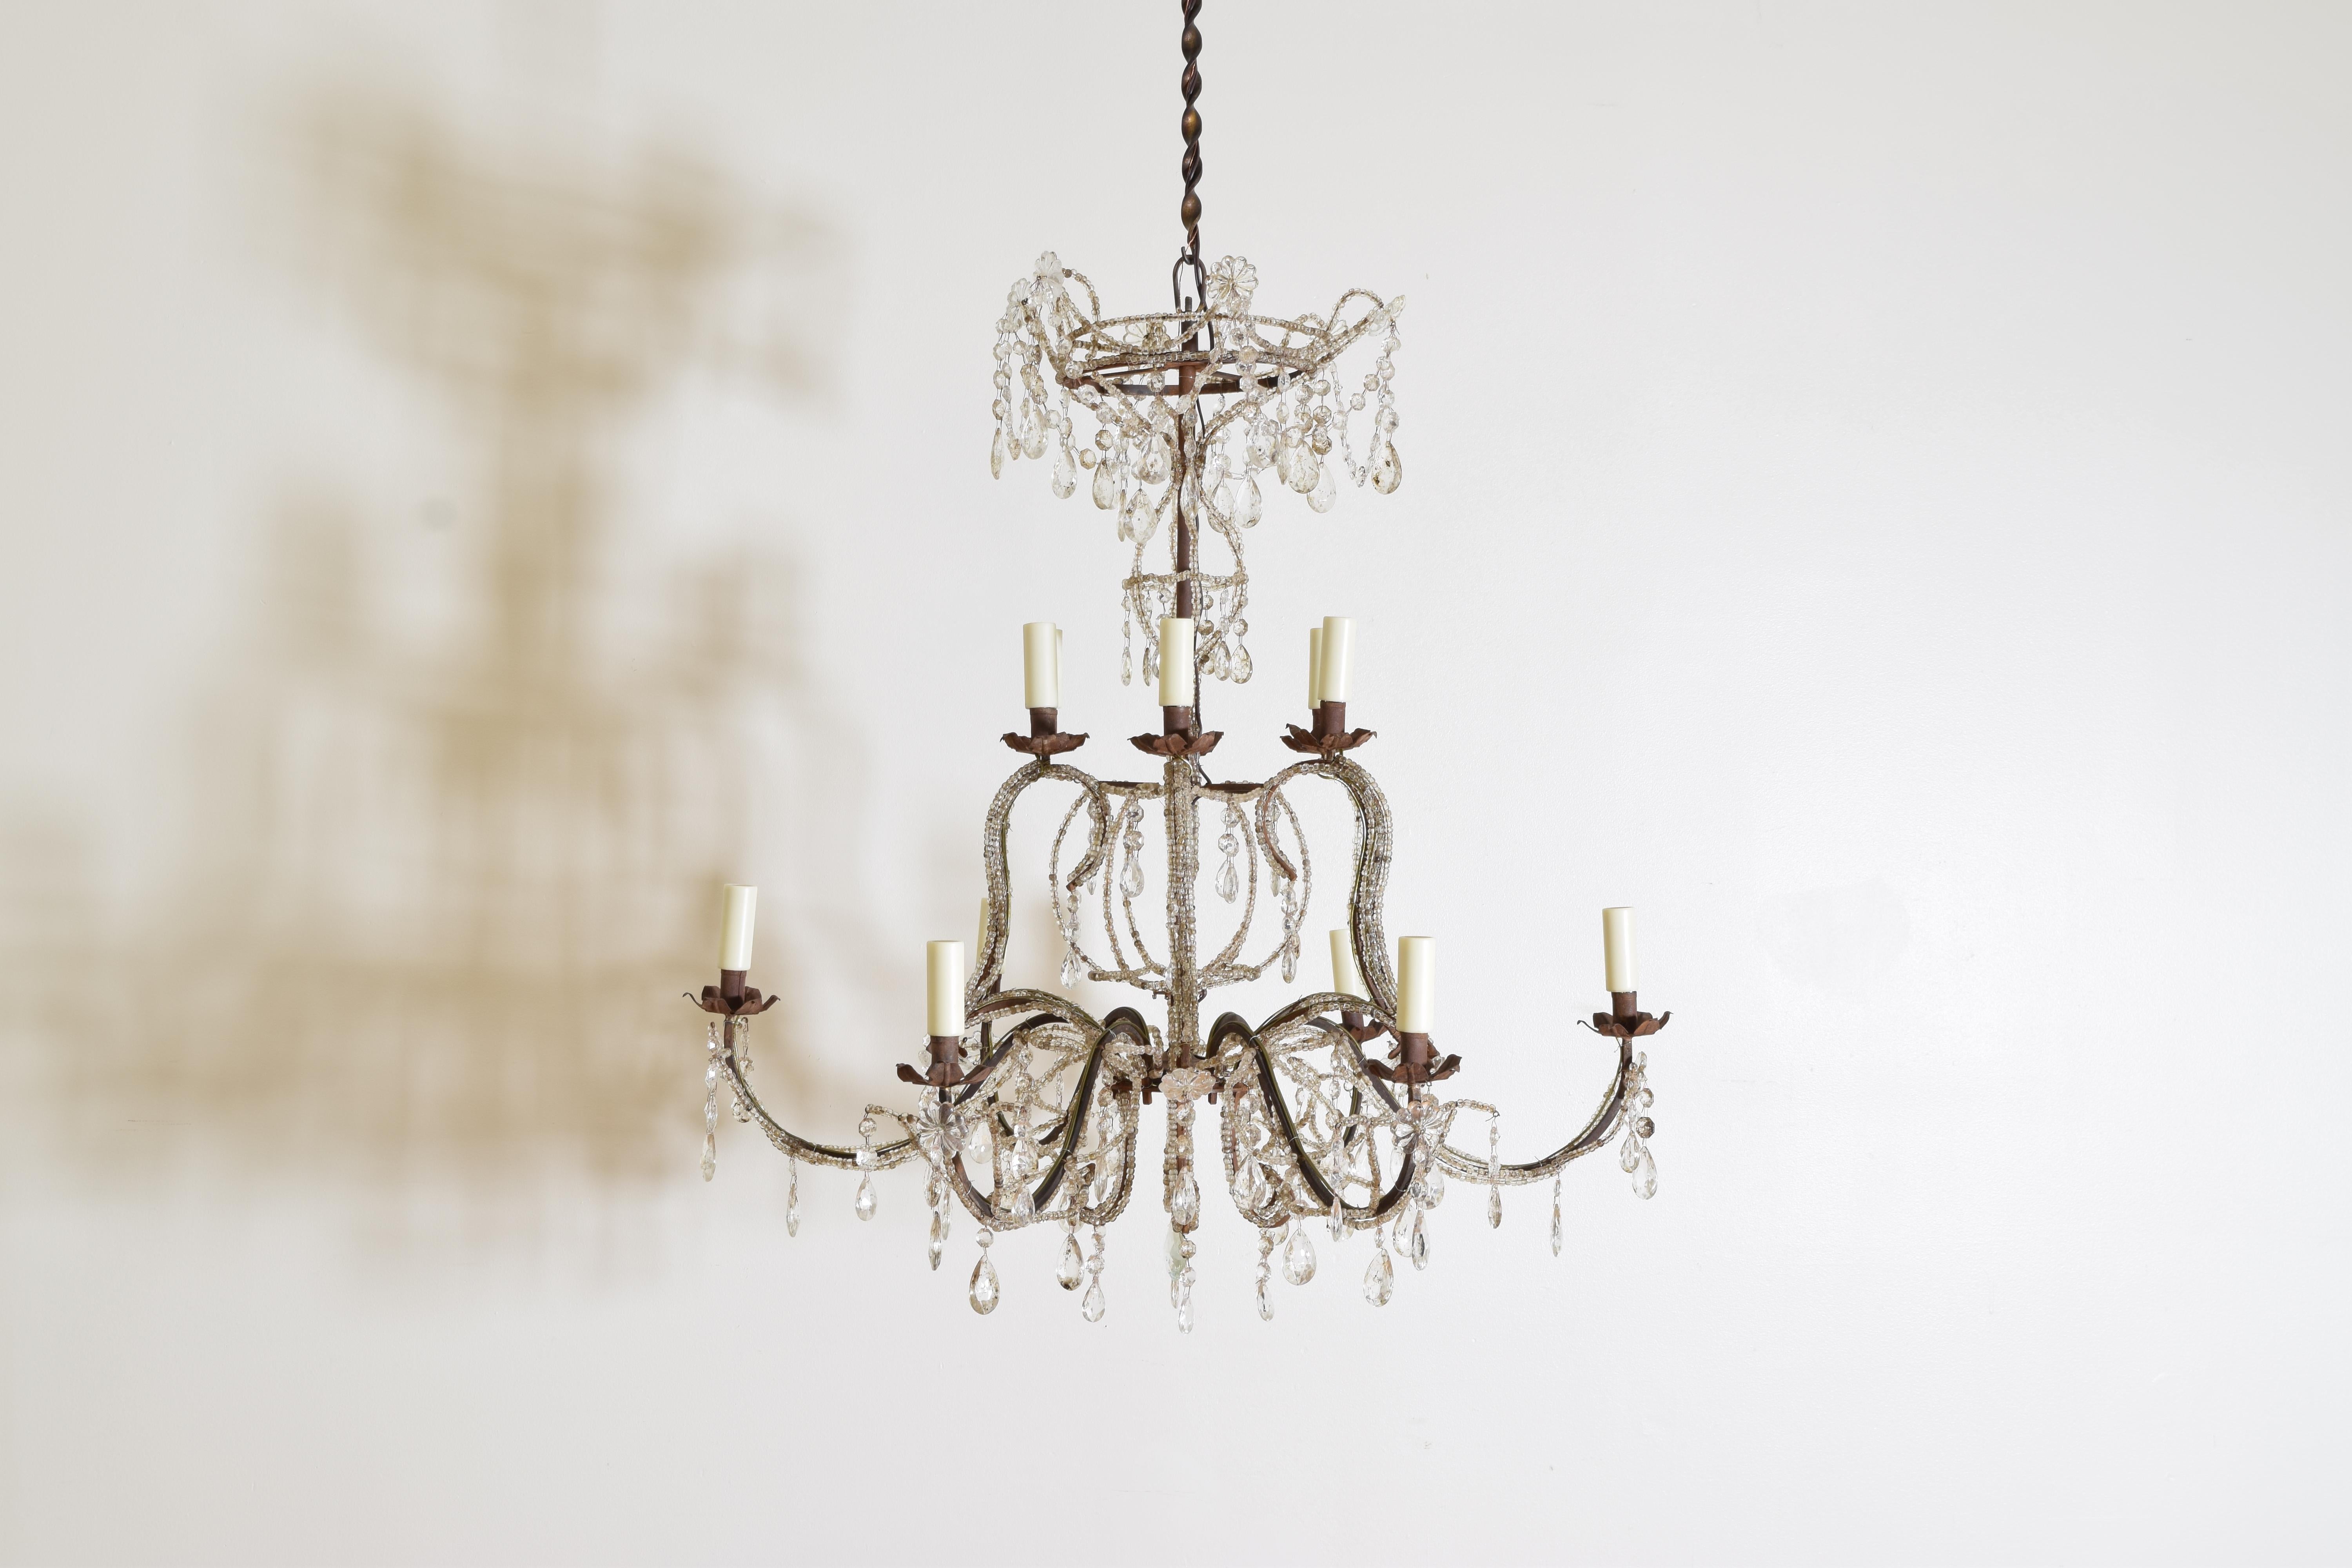 Twelve lights and two-tiered Crystal and Gilt Metal Chandeliers from Genoa, Italy, circa 1960s.